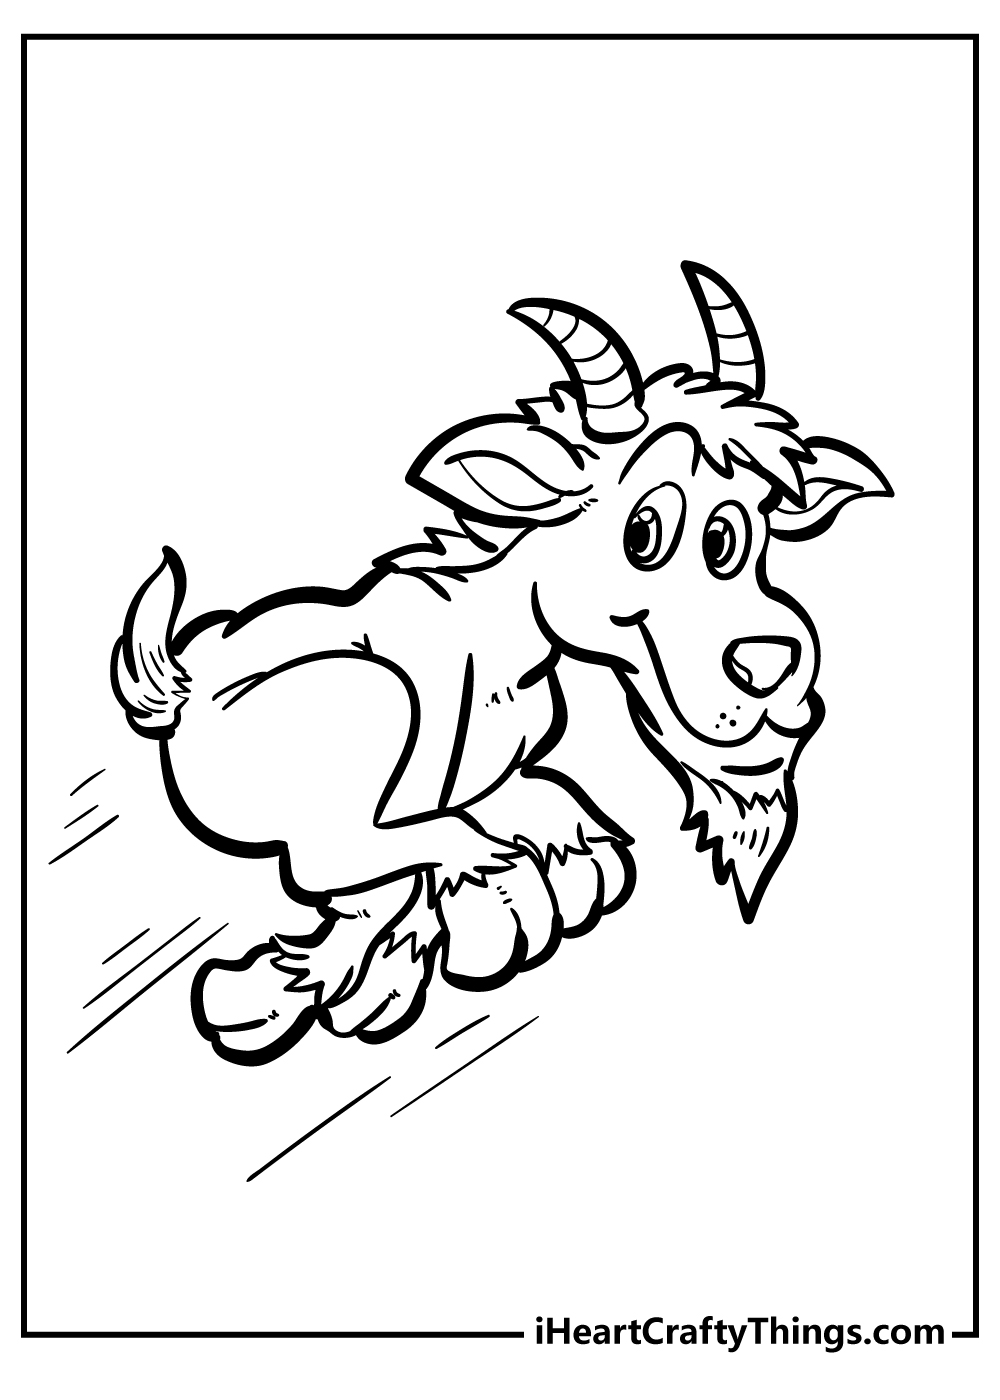 Goat Coloring Pages for adults free printable